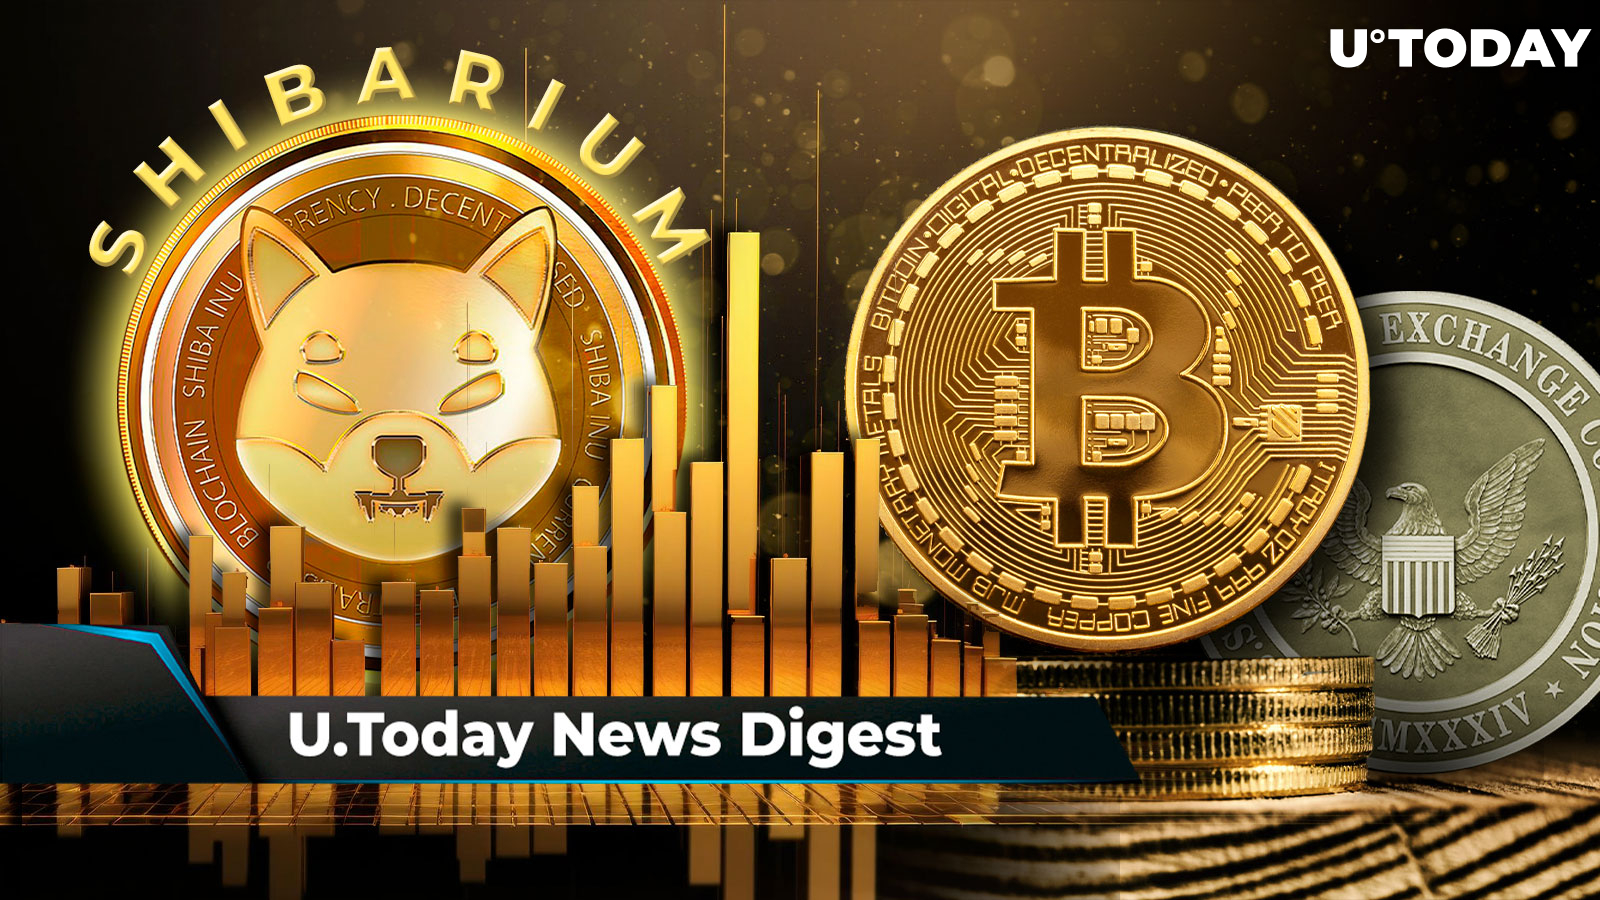 Shibarium Triples in Size in Just 24 Hours, Thousands of BTC Acquired by Insiders Before Grayscale v. SEC Ruling, SHIB Perpetuals Go Live in BitMEX: Crypto News Digest by U.Today